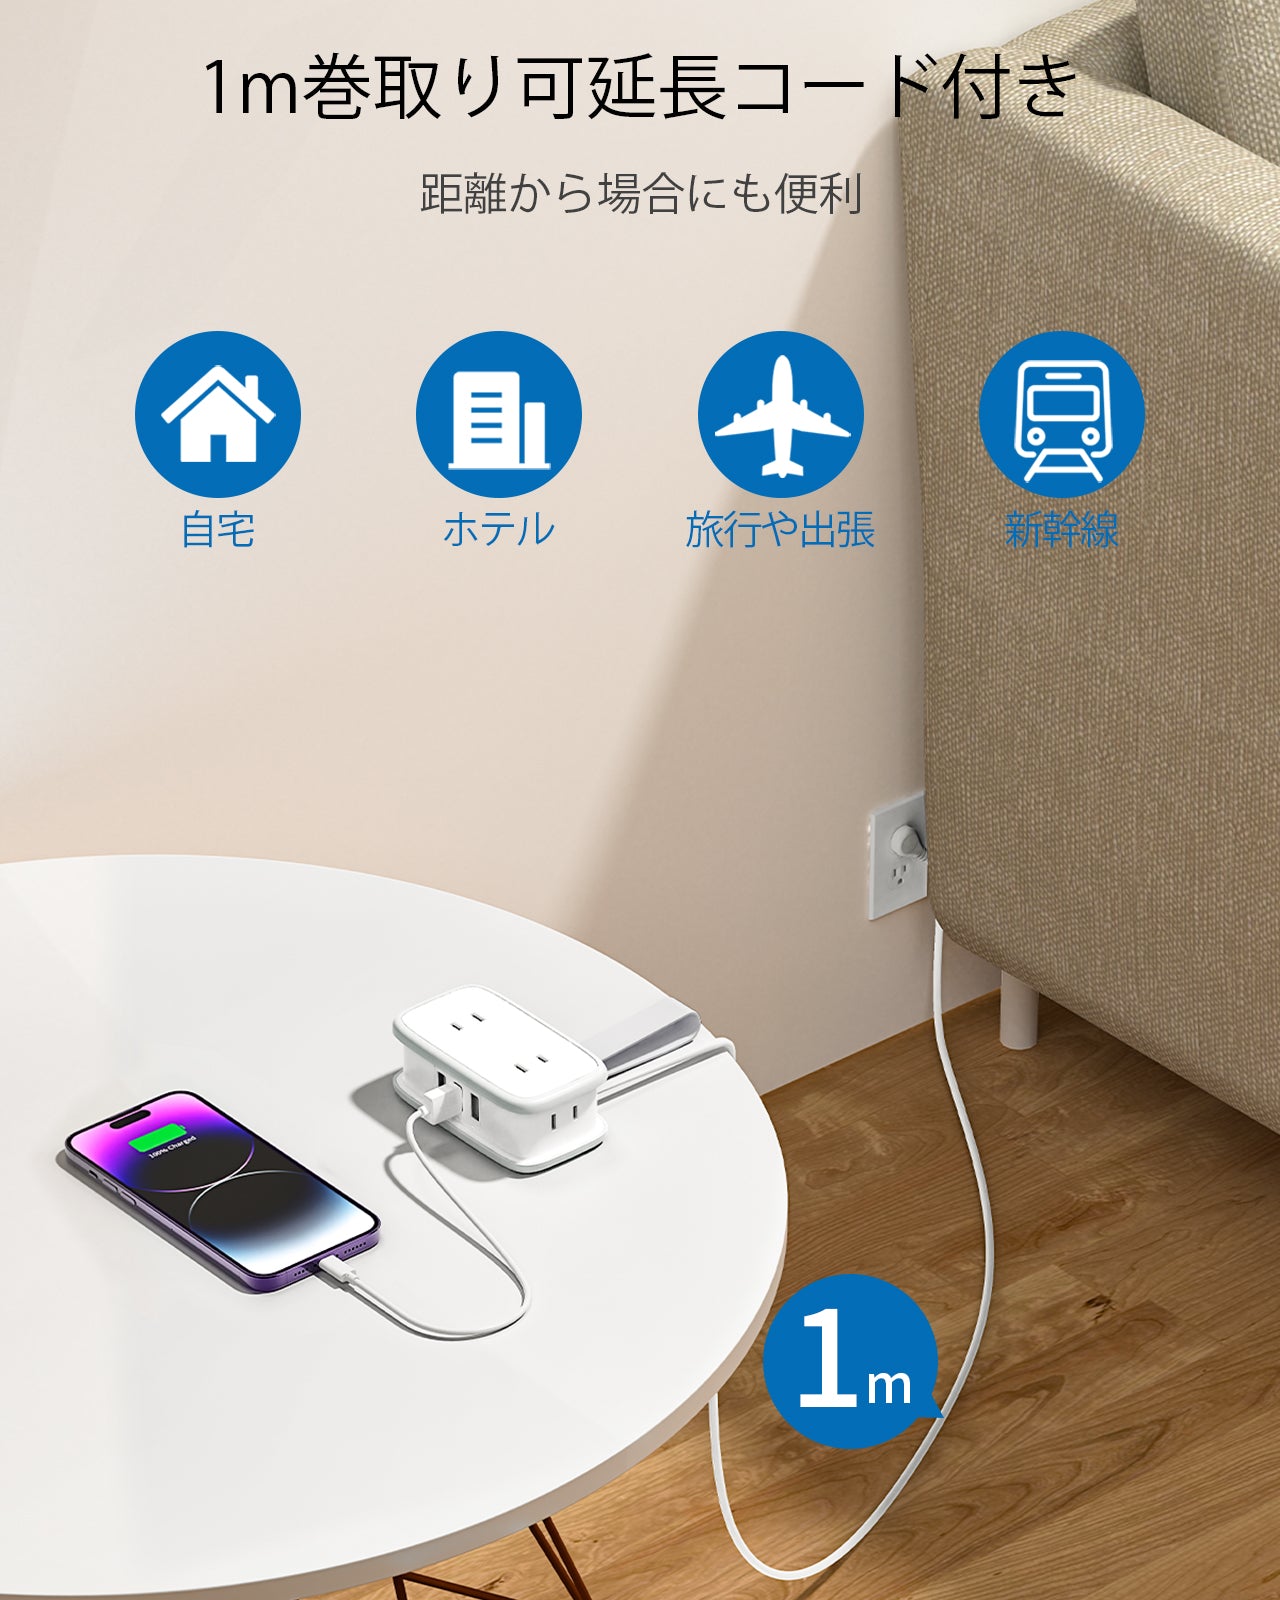 Ntonpower New JP Pocket Power Strip 4 Outlets 3 USB Small&Travel